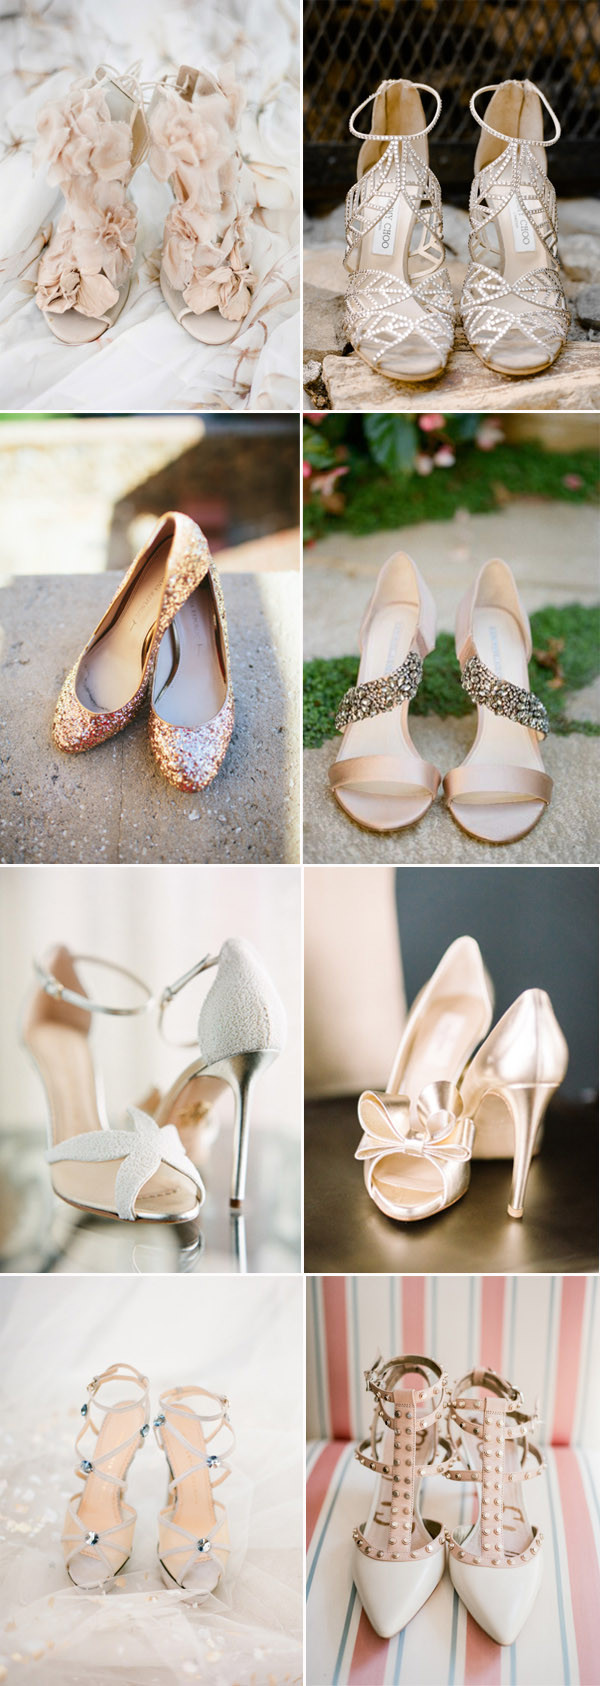 Fun Wedding Shoes
 22 Unique Wedding Shoes Ideas to Steal